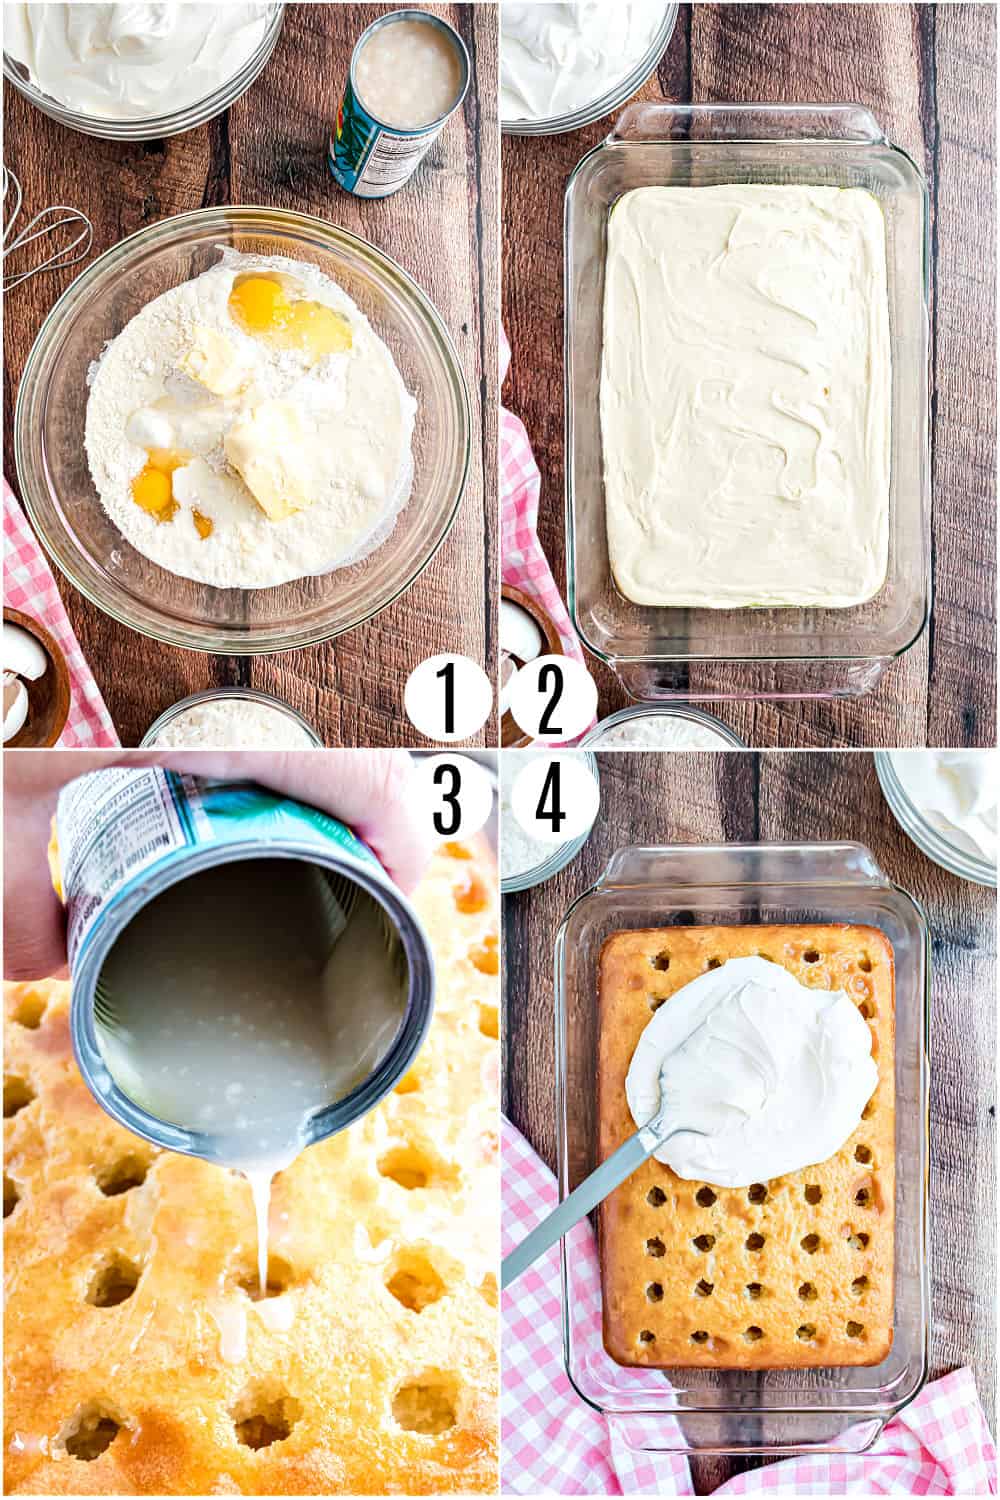 Step by step photos showibng how to make coconut poke cake.